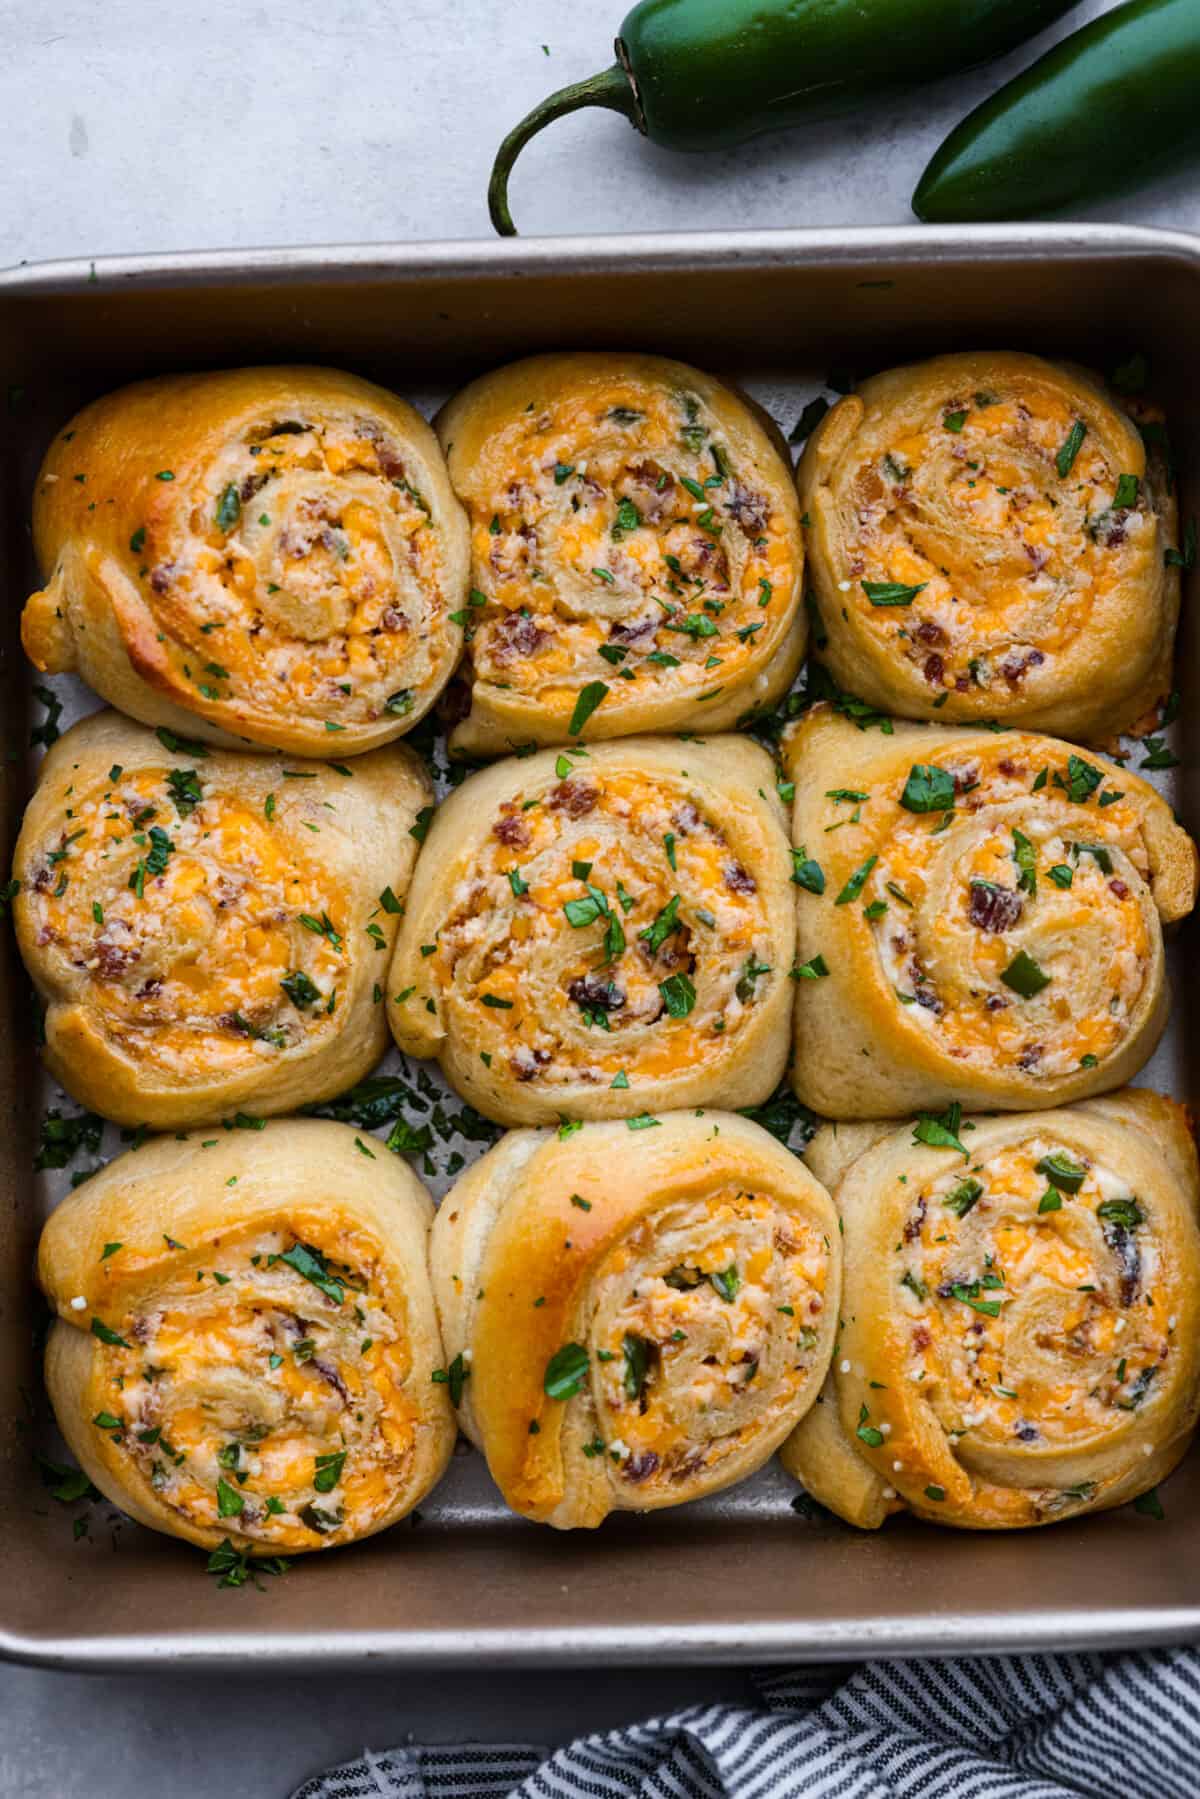 Top view of jalapeno popper rolls baked in a pan.